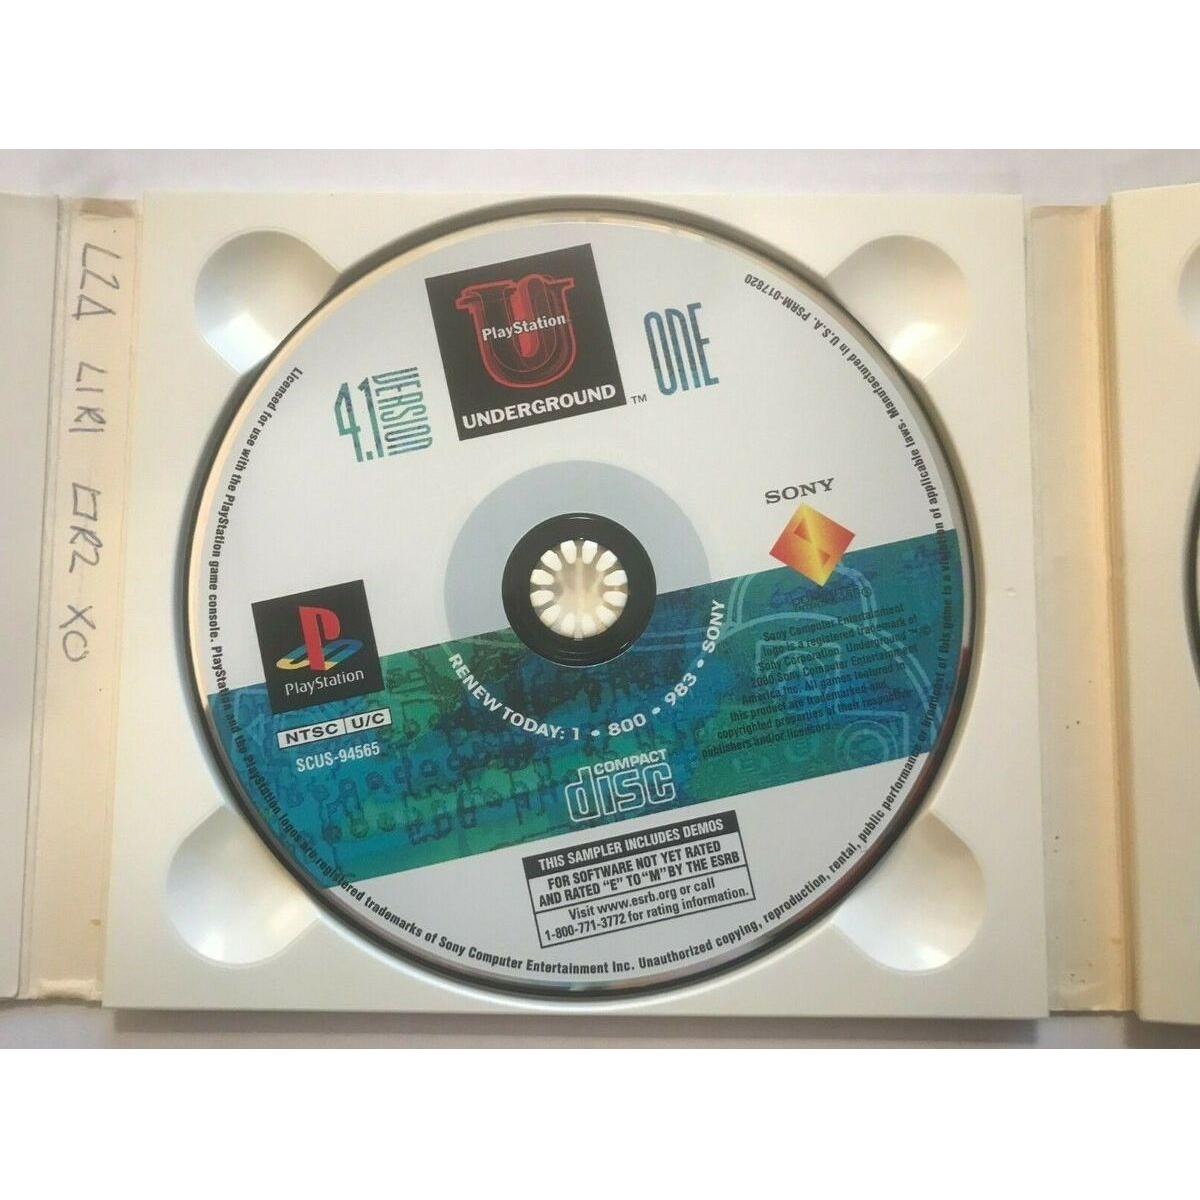 PS1 - PlayStation Underground Volume 4.1 (Disc One Only)